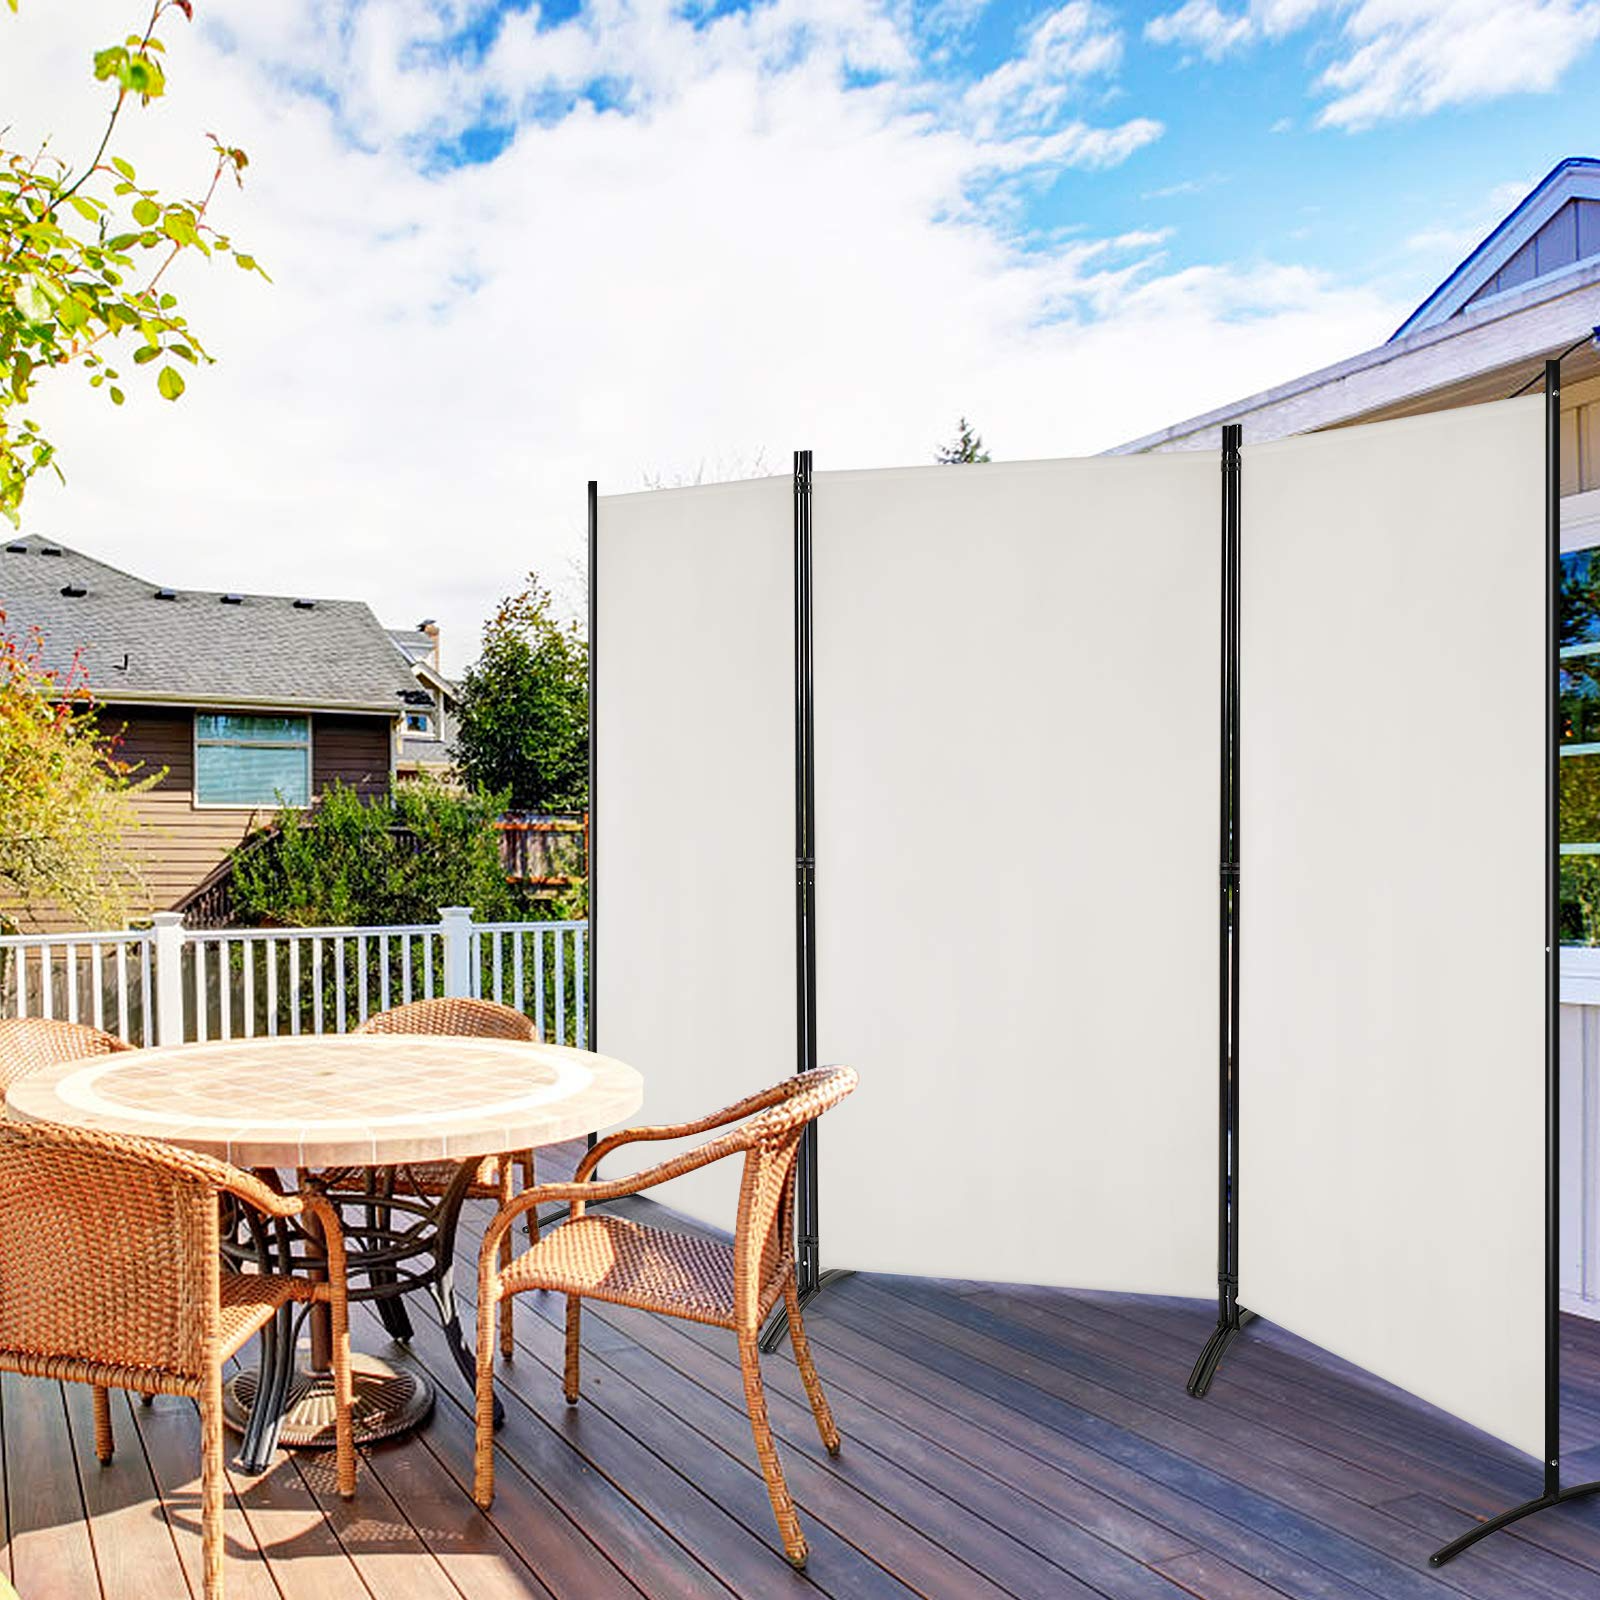 Giantex 6 Ft 3 Panel Room Divider, Folding Portable Privacy Screen w/ Durable Hinges Steel Base